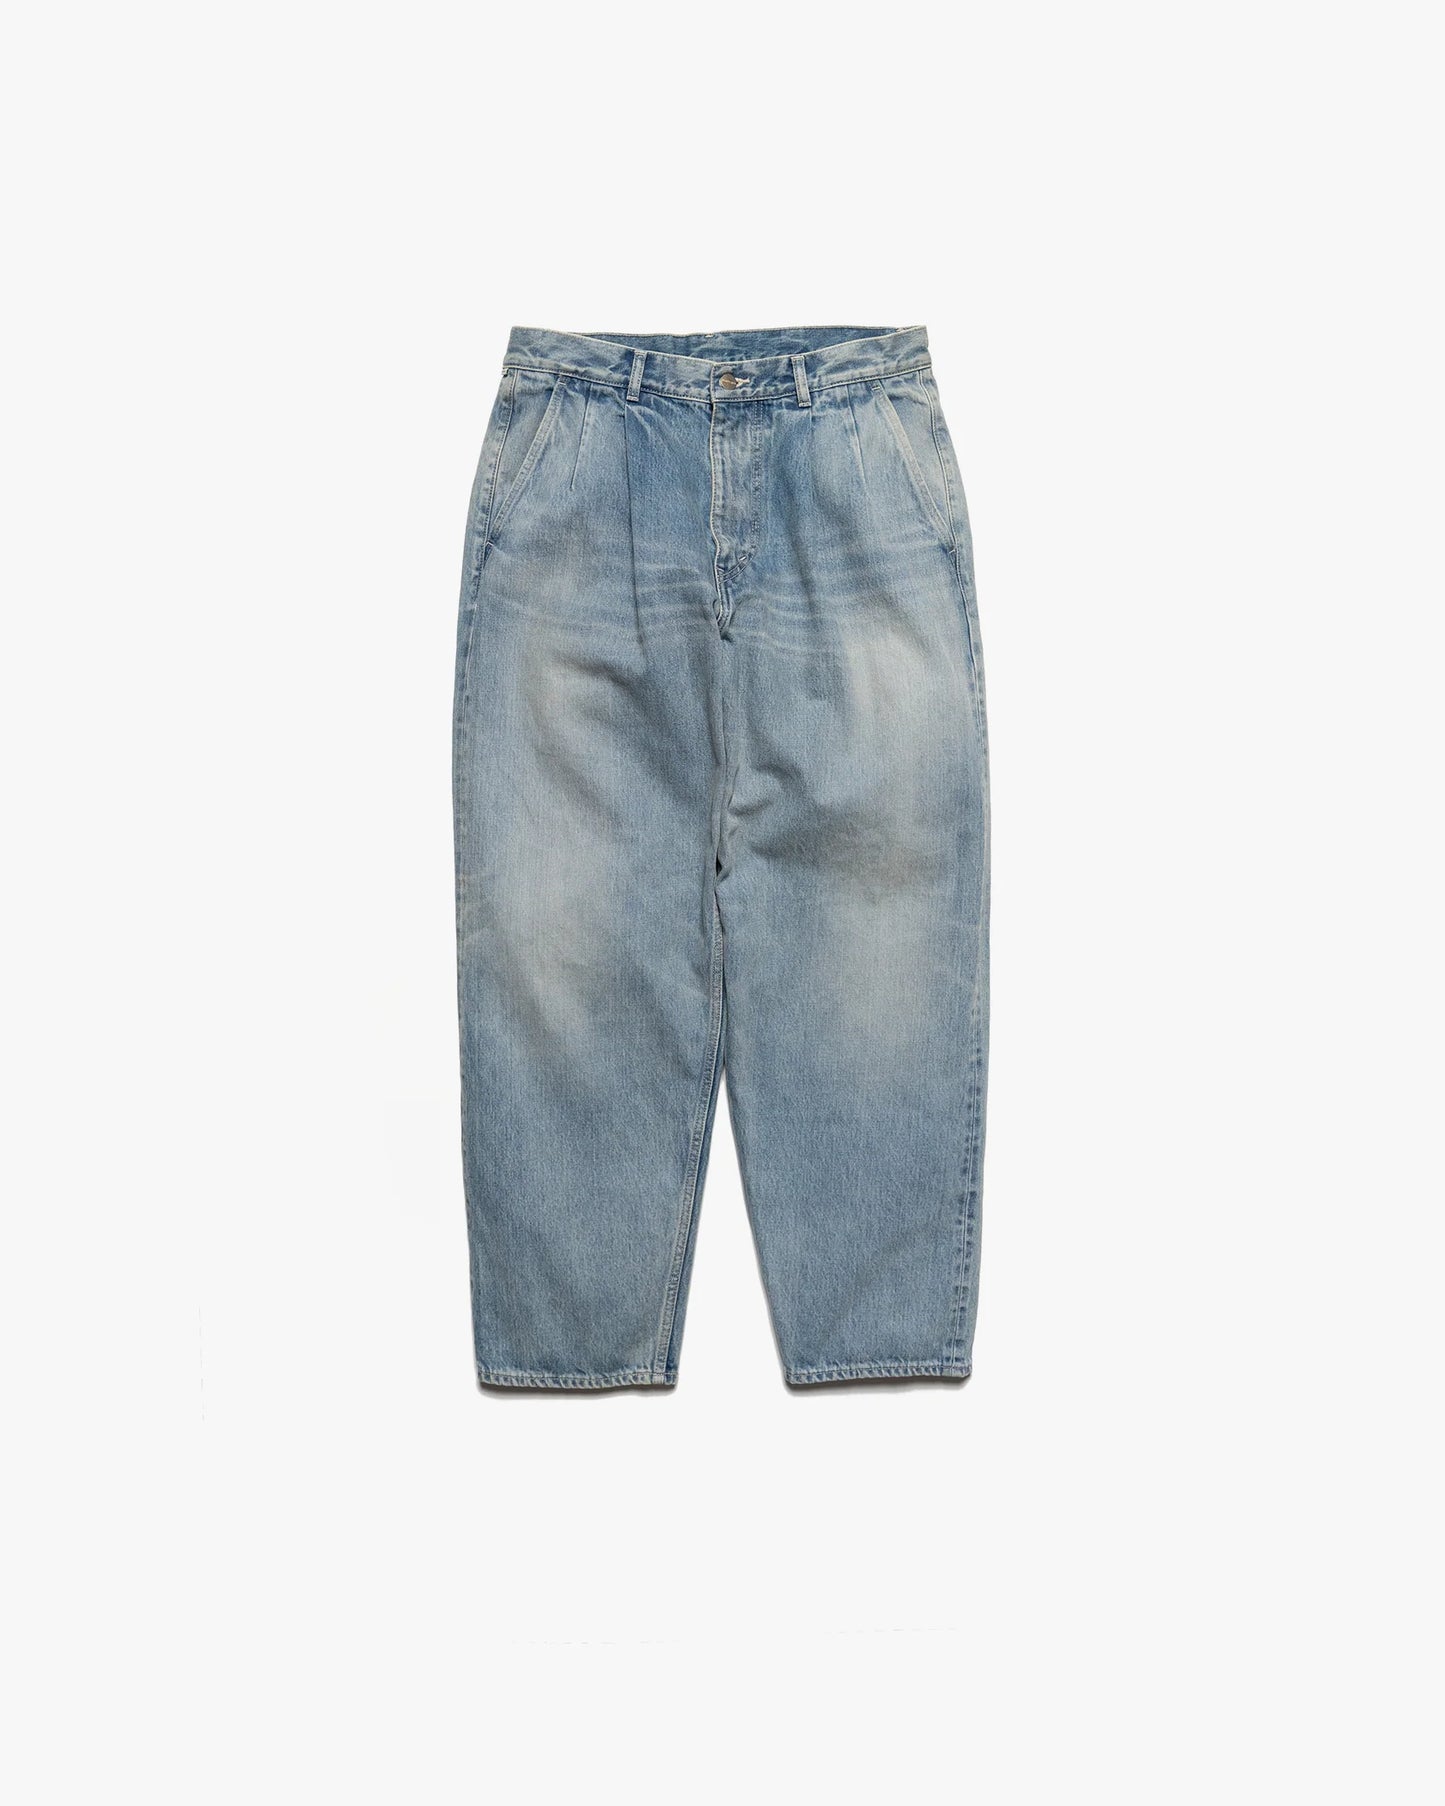 Graphpaper Selvage Denim Two Tuck Tapered Pants - LIGHT FADE ...